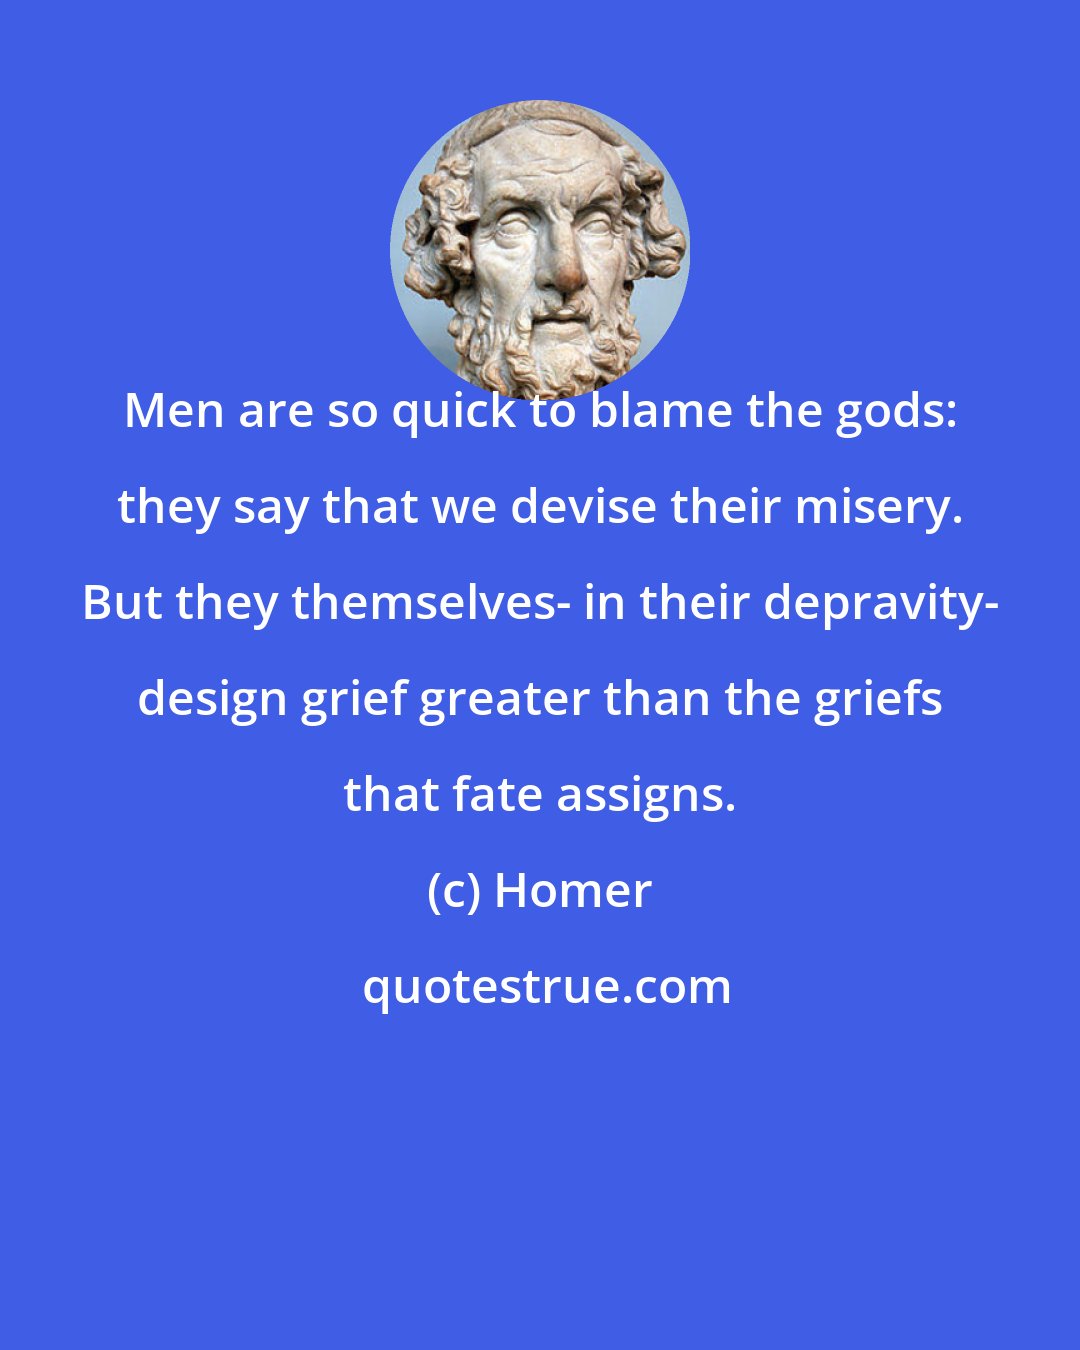 Homer: Men are so quick to blame the gods: they say that we devise their misery. But they themselves- in their depravity- design grief greater than the griefs that fate assigns.